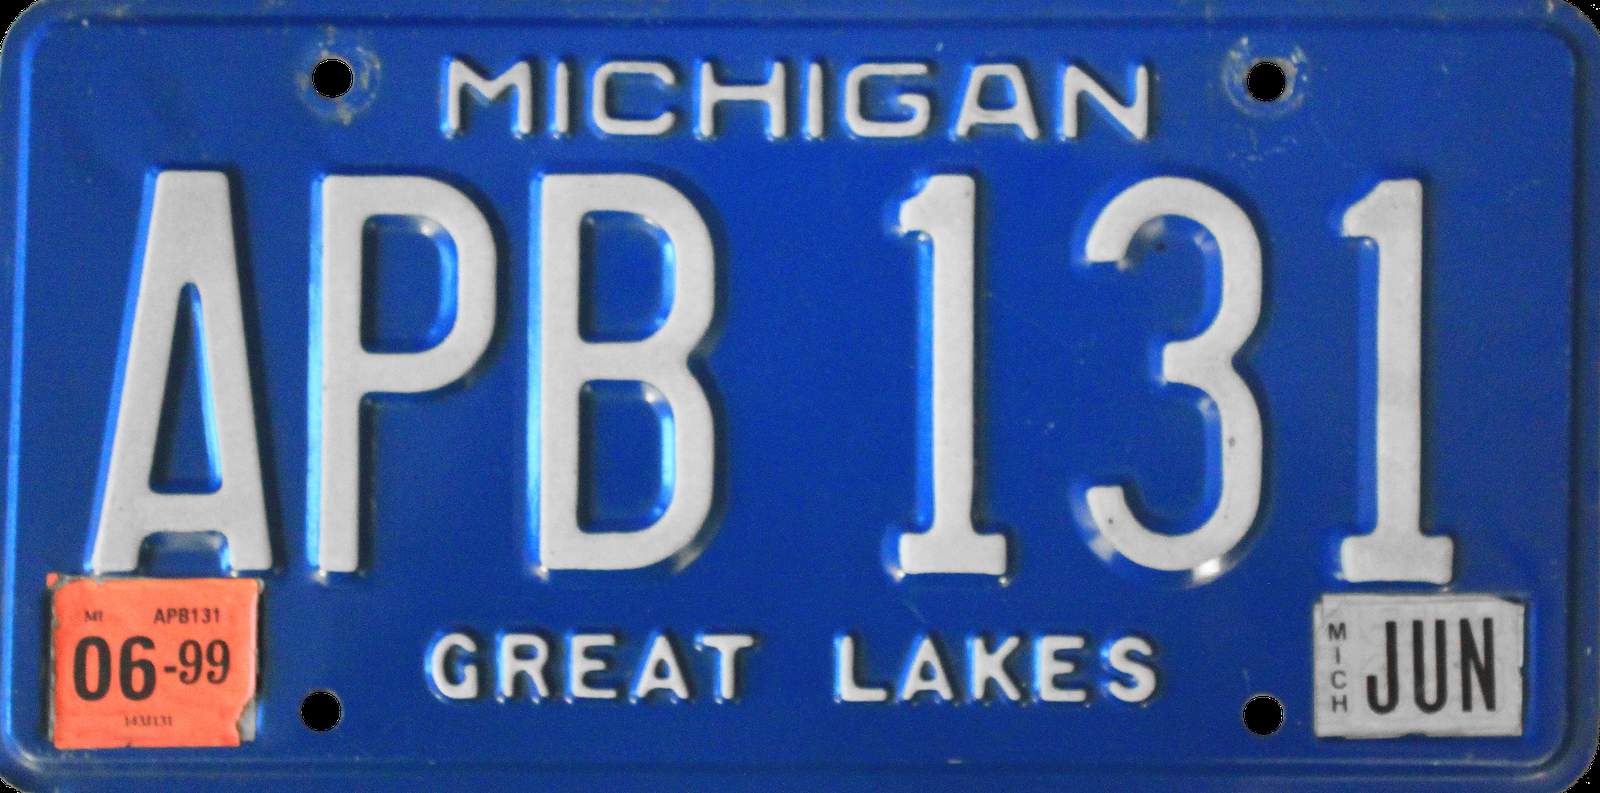 Going retro? Michigan bill would allow classic license plates for $100 fee